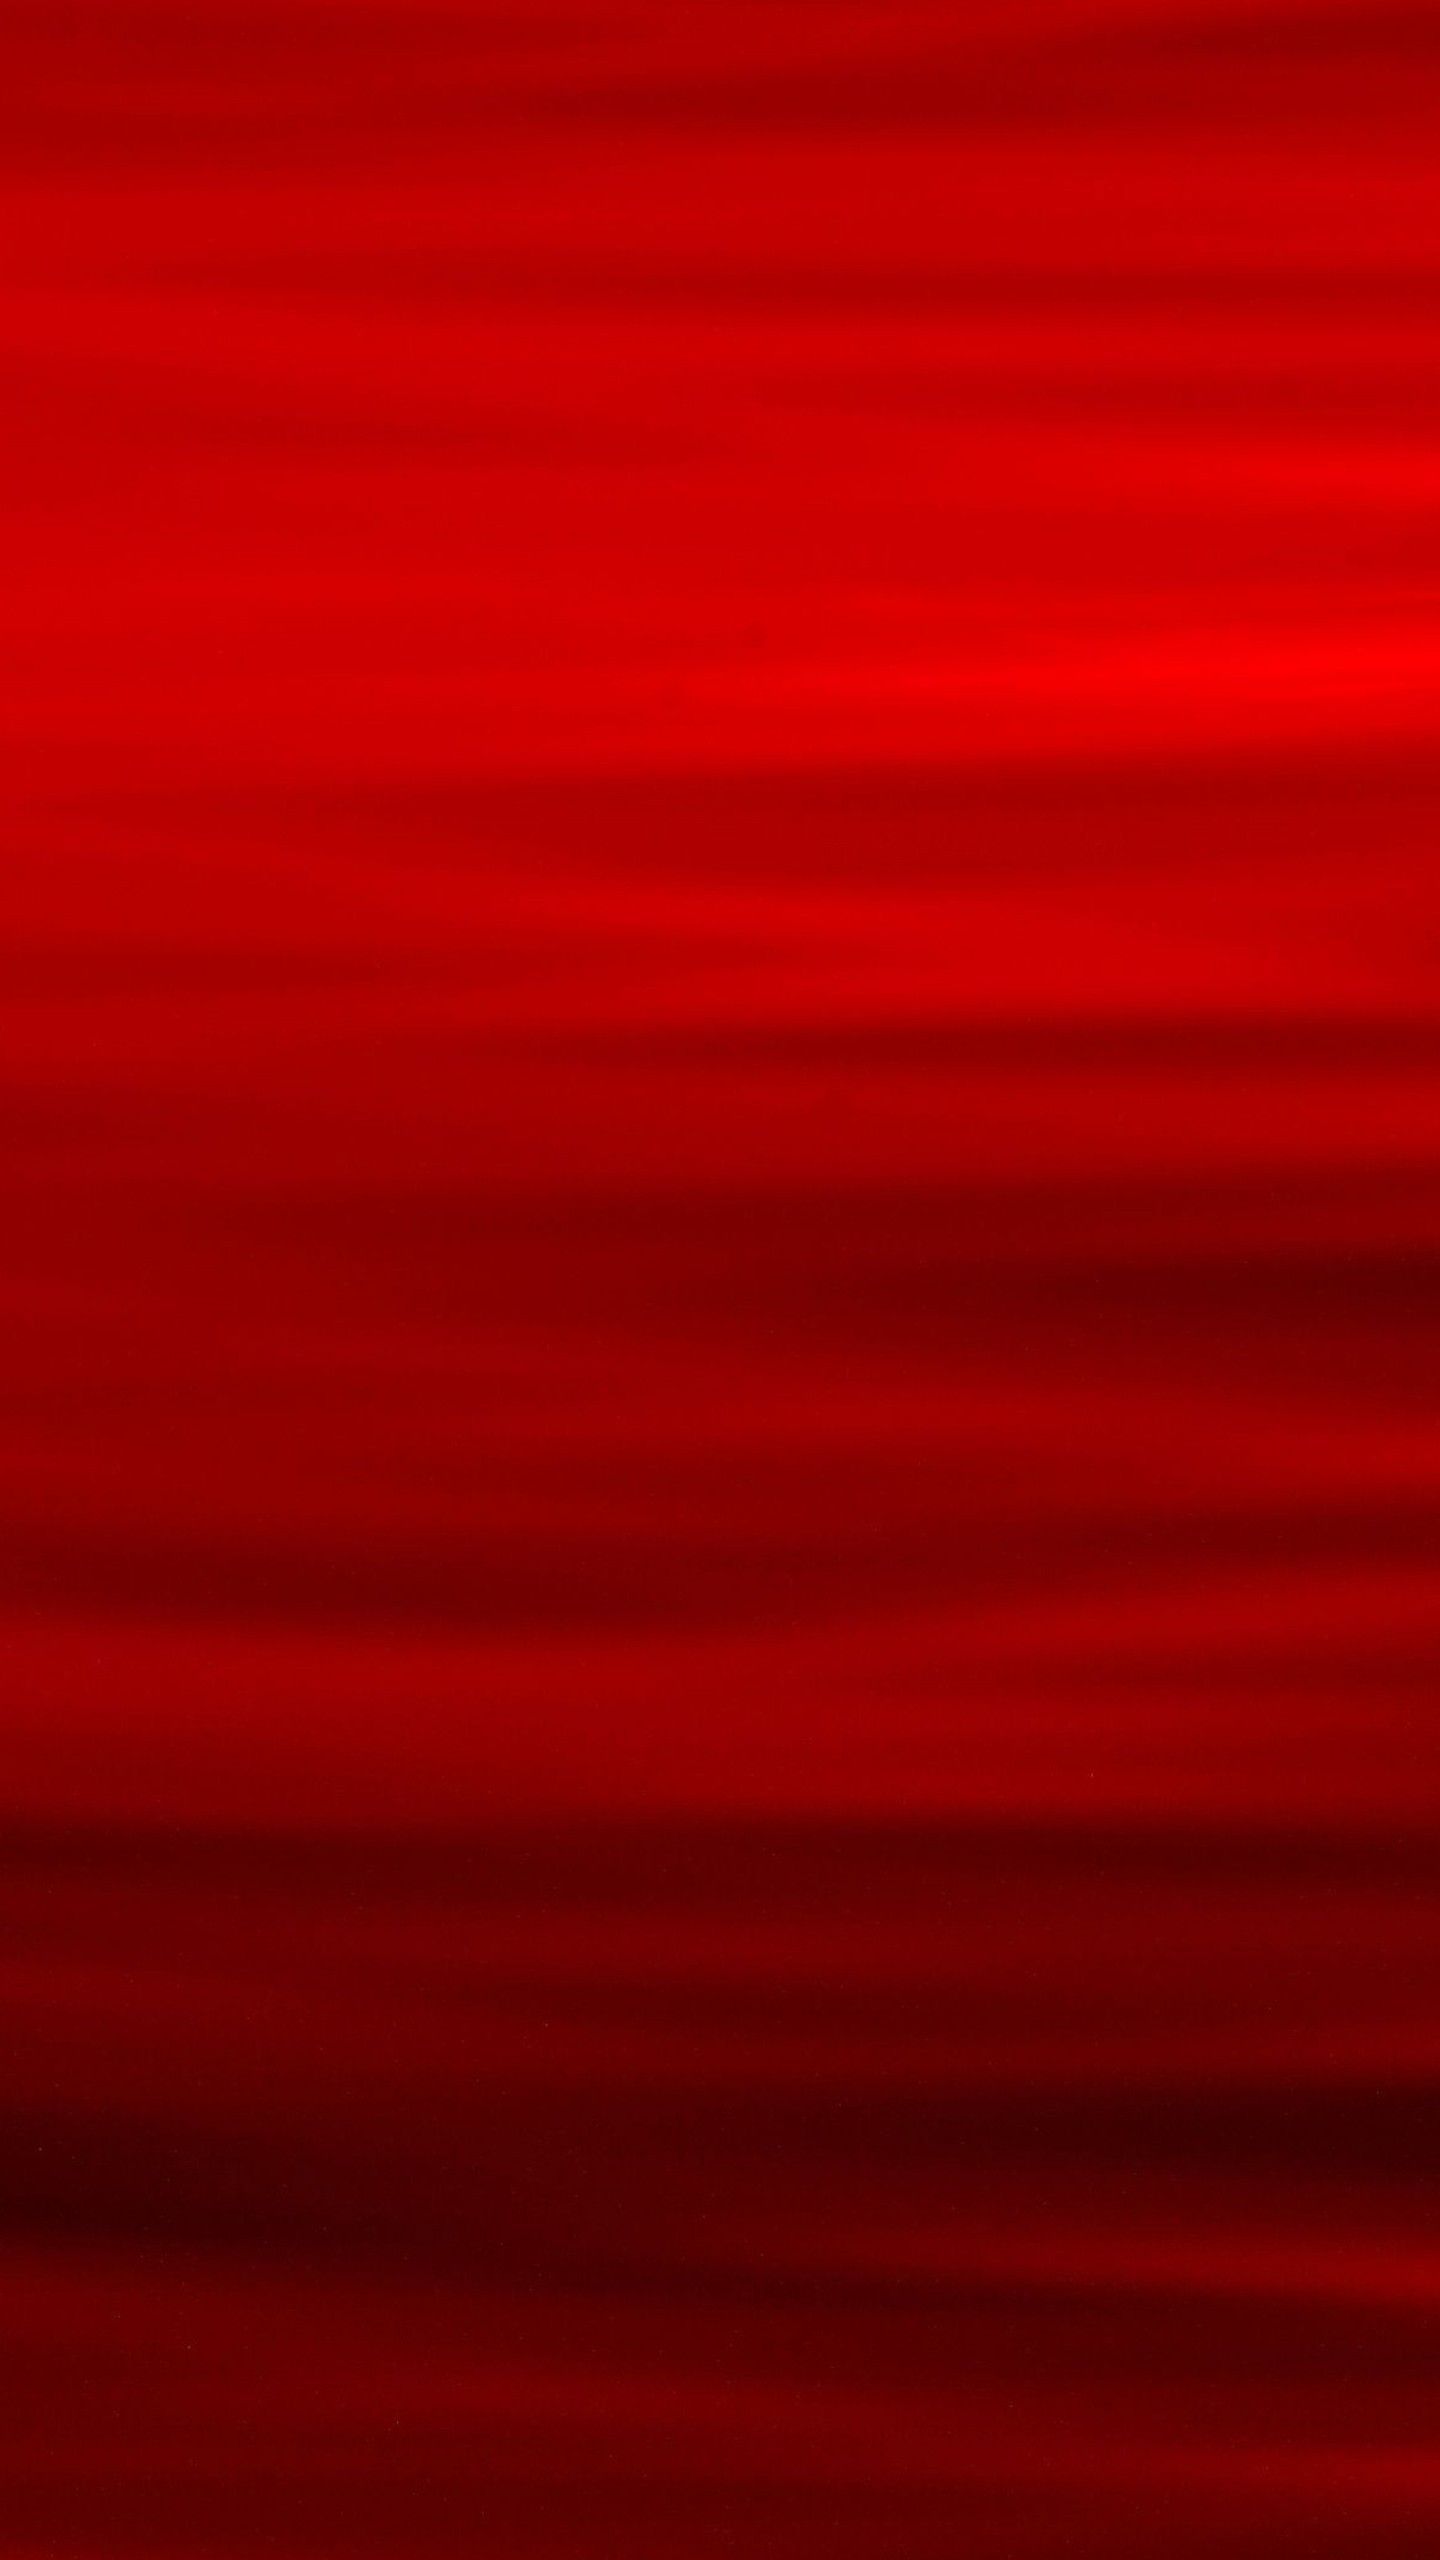 A red background with some blurred lines - Dark red, iPhone red